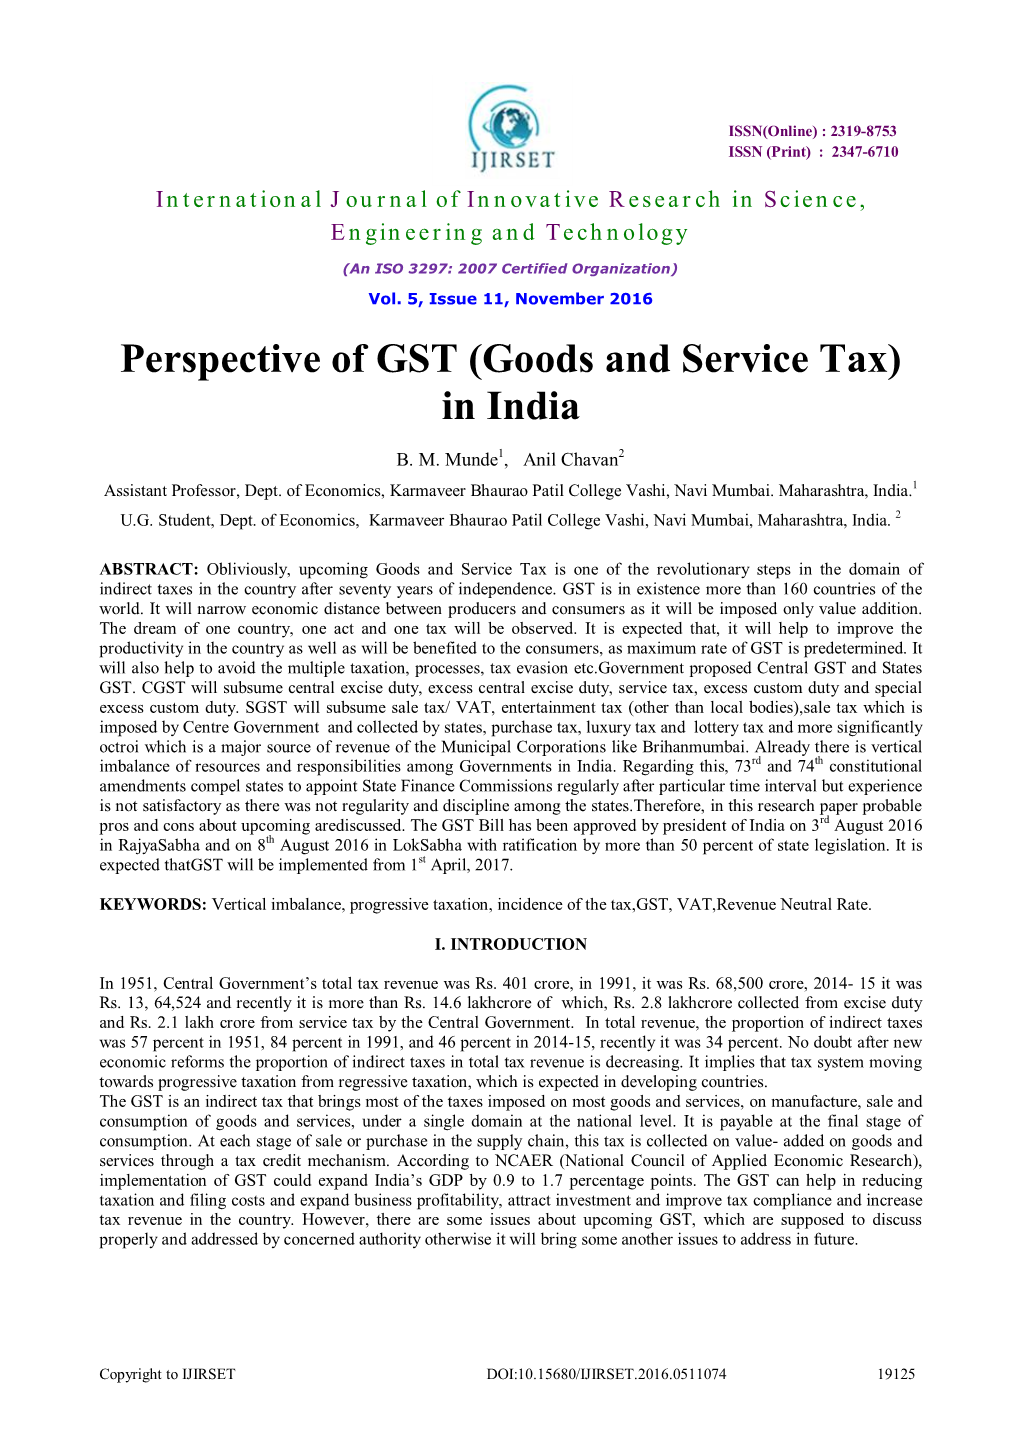 Perspective of GST (Goods and Service Tax) in India